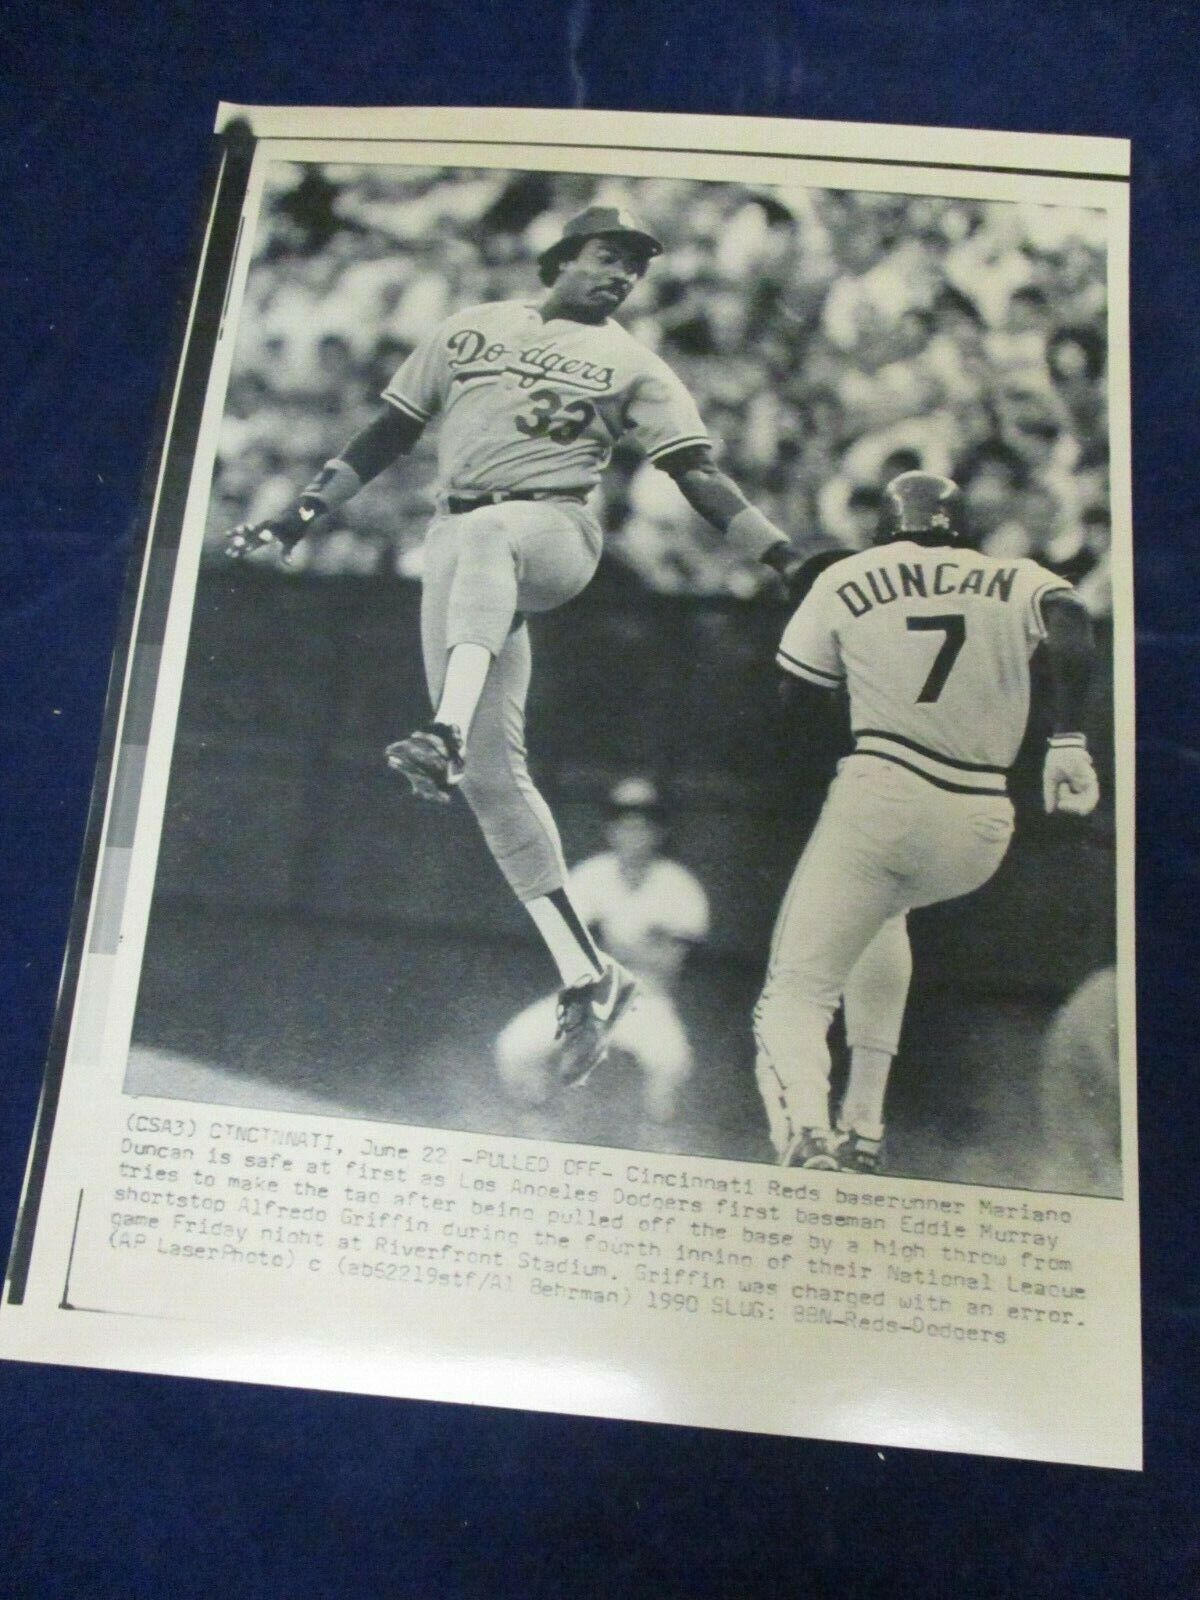 1990 MLB Mariano Duncan tagged by Eddie Murray leaping Vintage Wire Press Photo